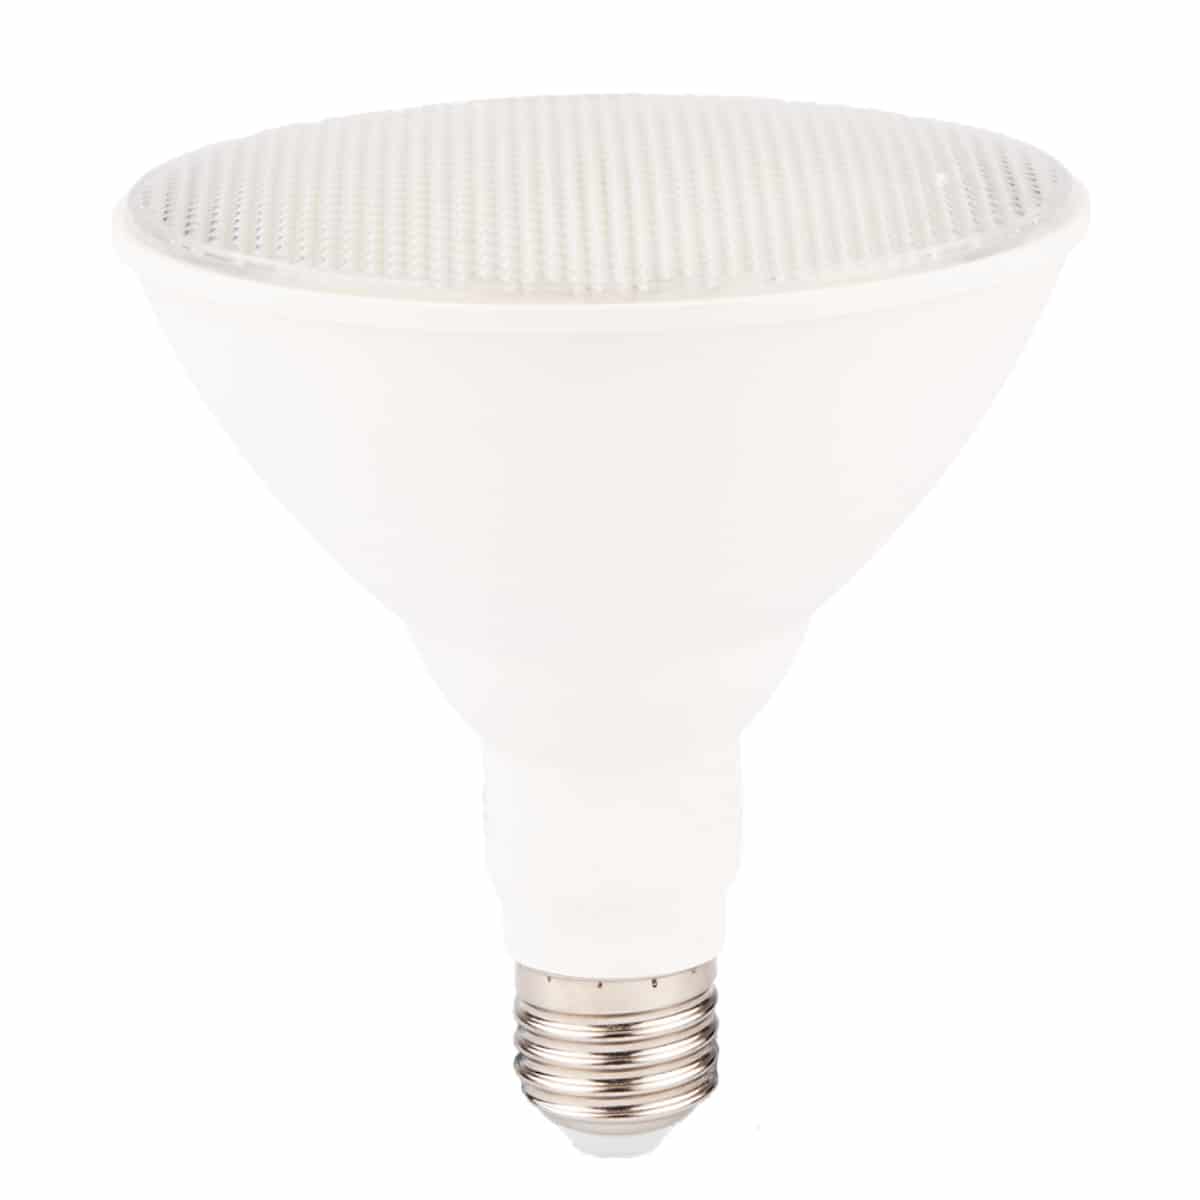 Discover the Latest Energy-Efficient Light Bulbs for Improved Illumination